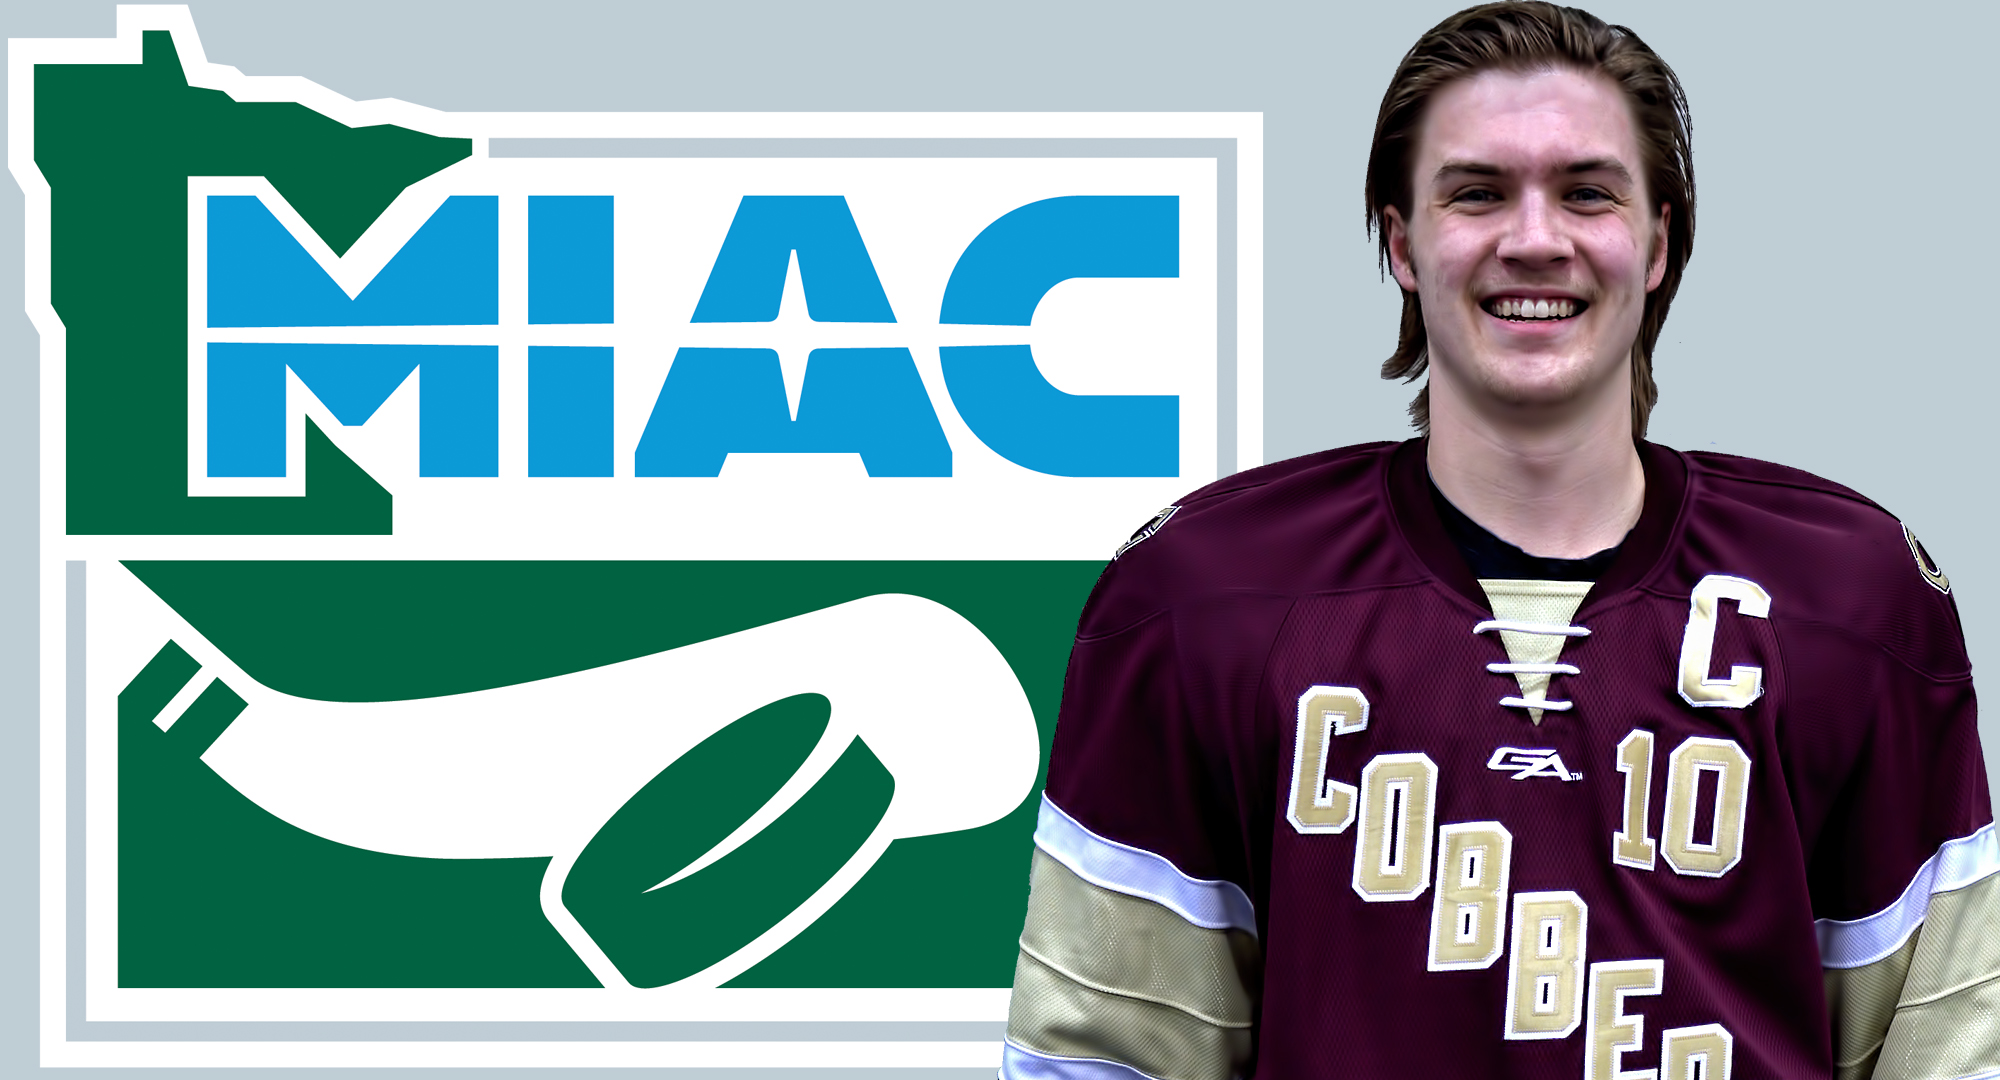 Senior Zach Doerring became the fifth Cobber player since 1982 to earn the MIAC Most Valuable Player award.